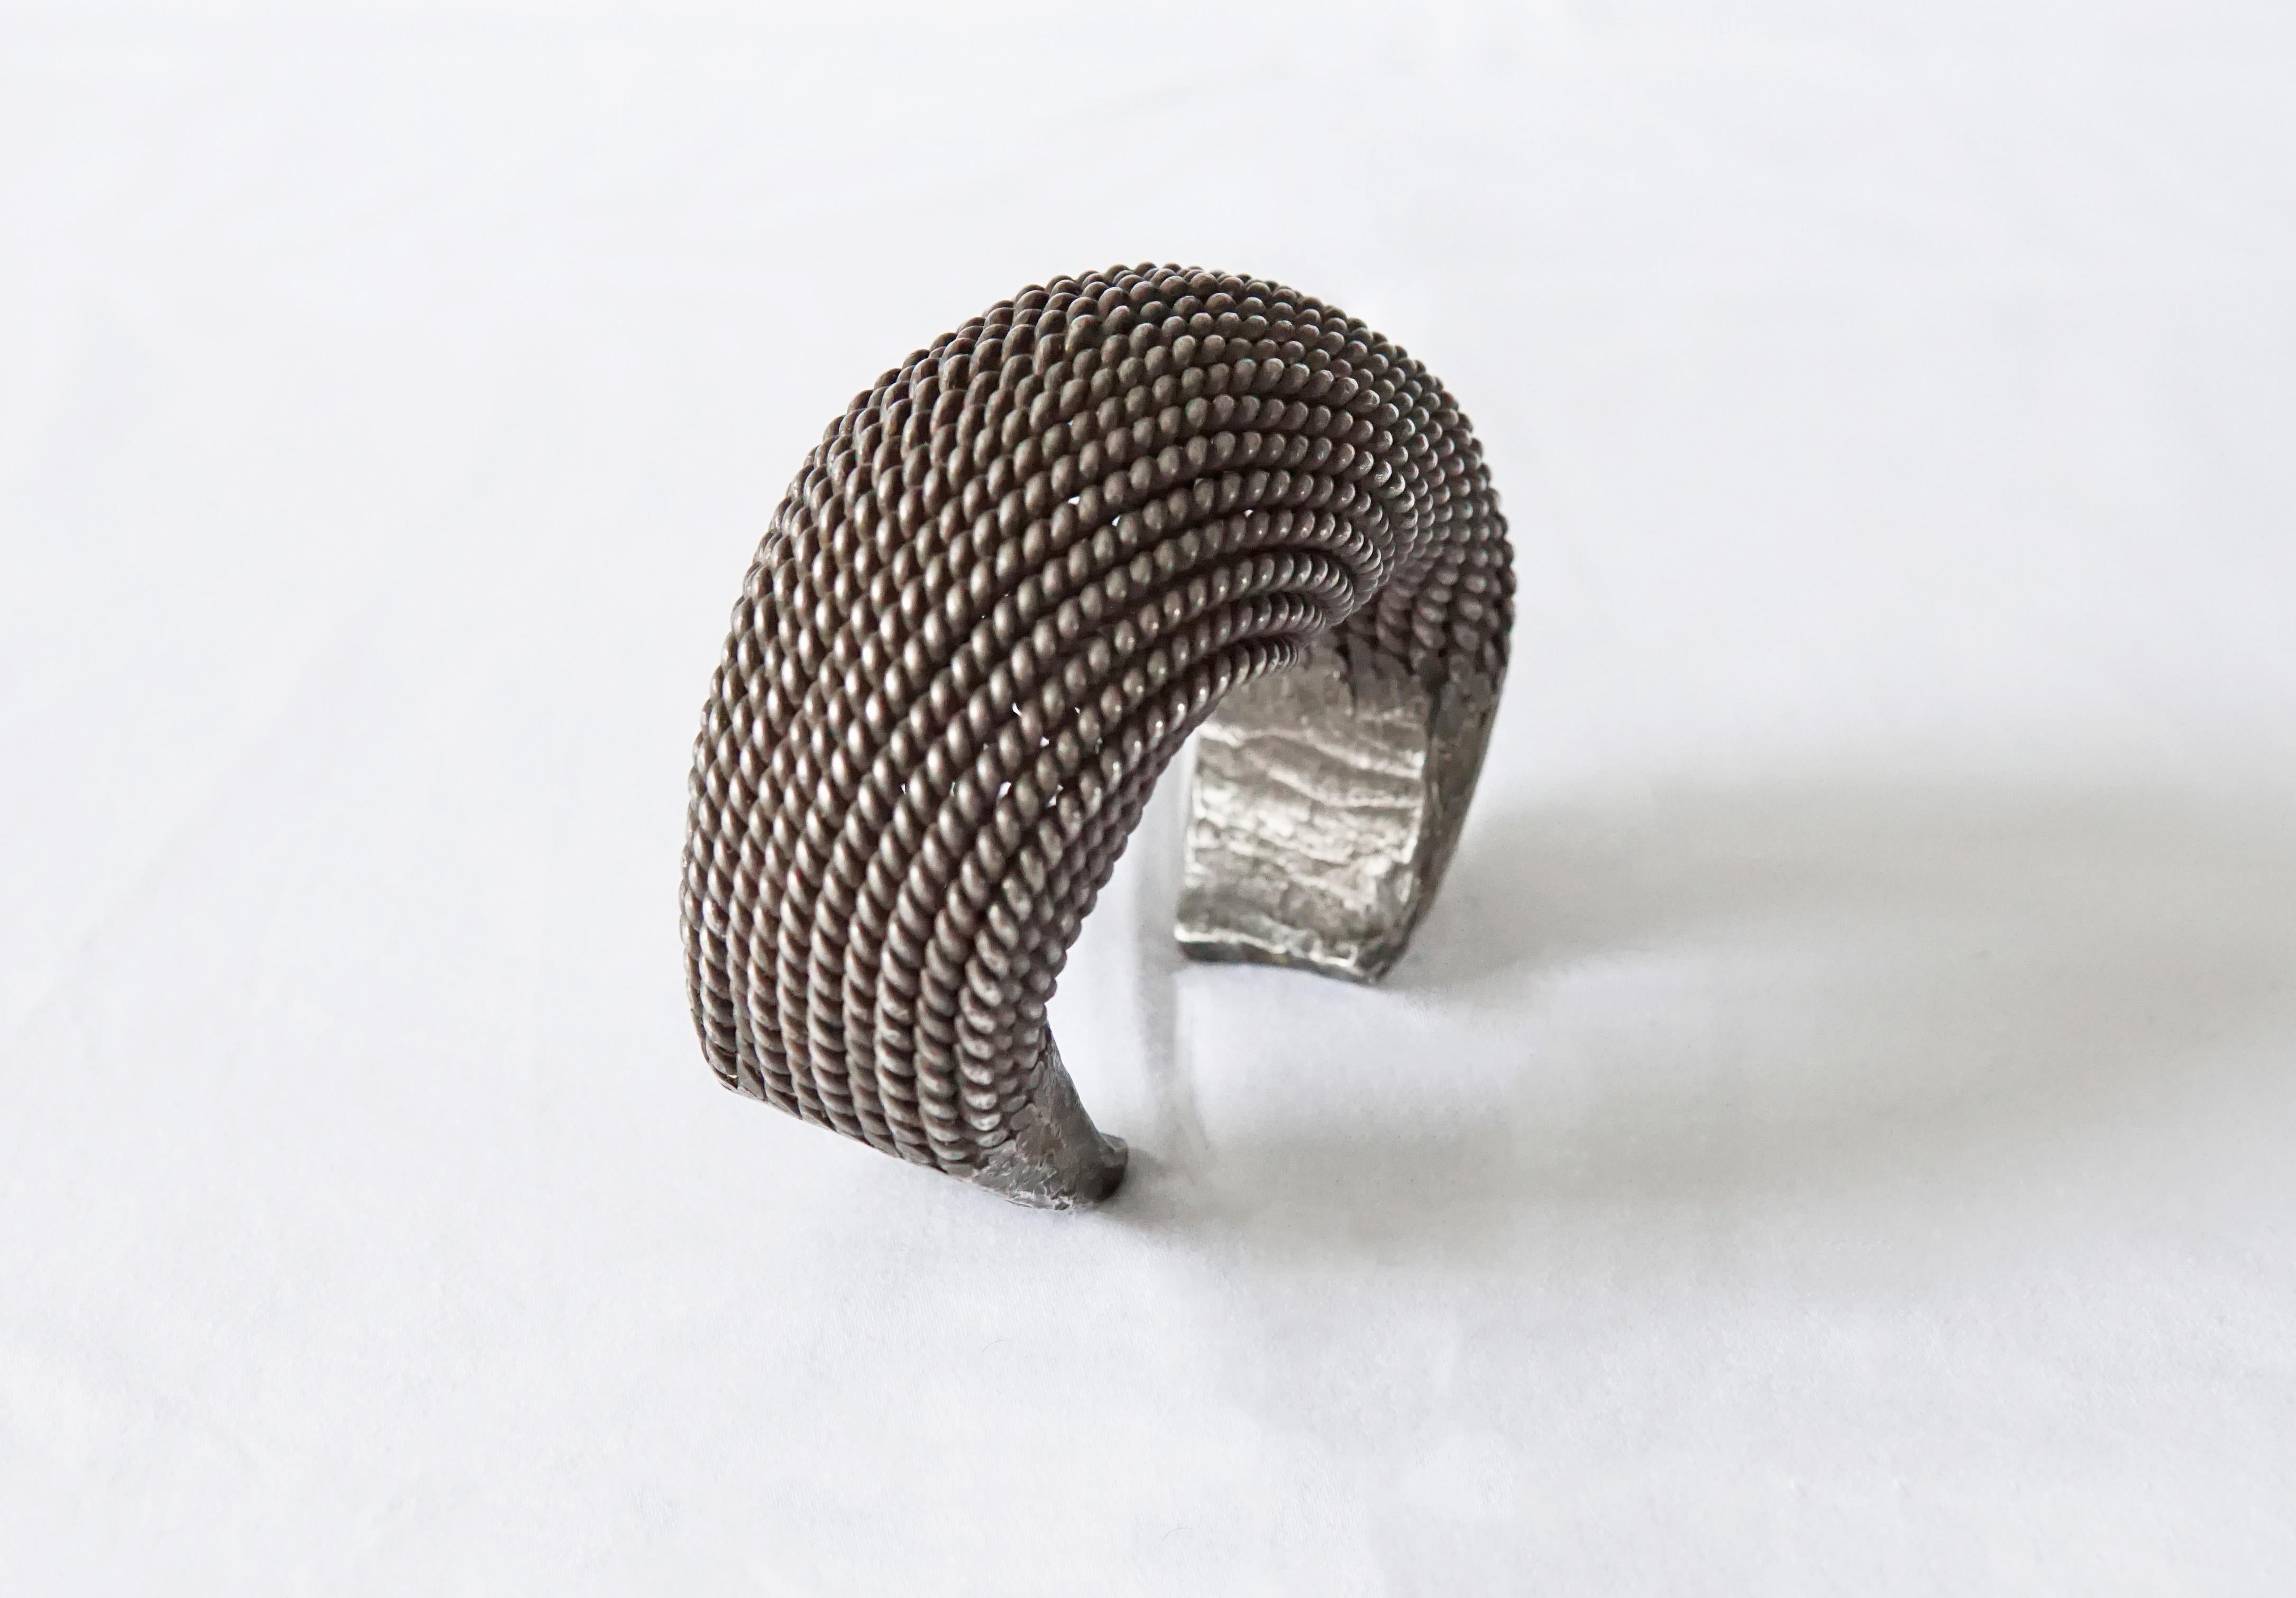 A large Akha Tribe woven silver bracelet with spiral design. This Tribal bracelet encompasses tradition Hill tribe silversmithing techniques with each silver strand crafted and woven by hand. This bracelet is slightly adjustable to fit different